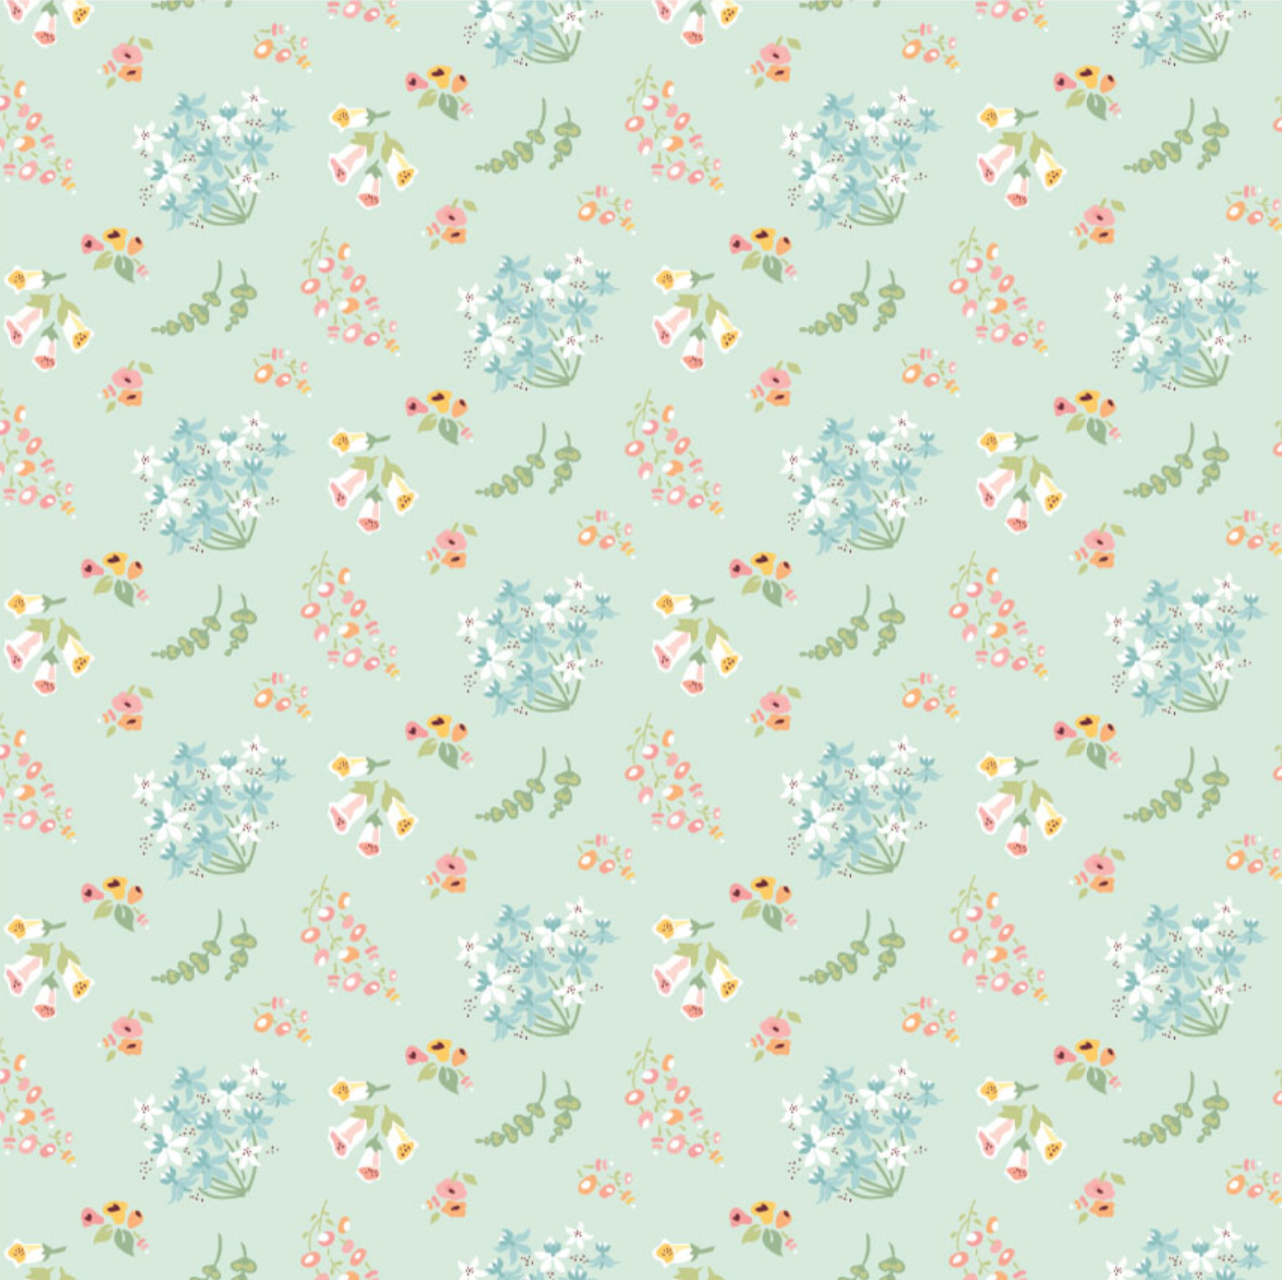 Hollyhock Lane, HL23803, Bloom Mint, sold by the 1/2 yard